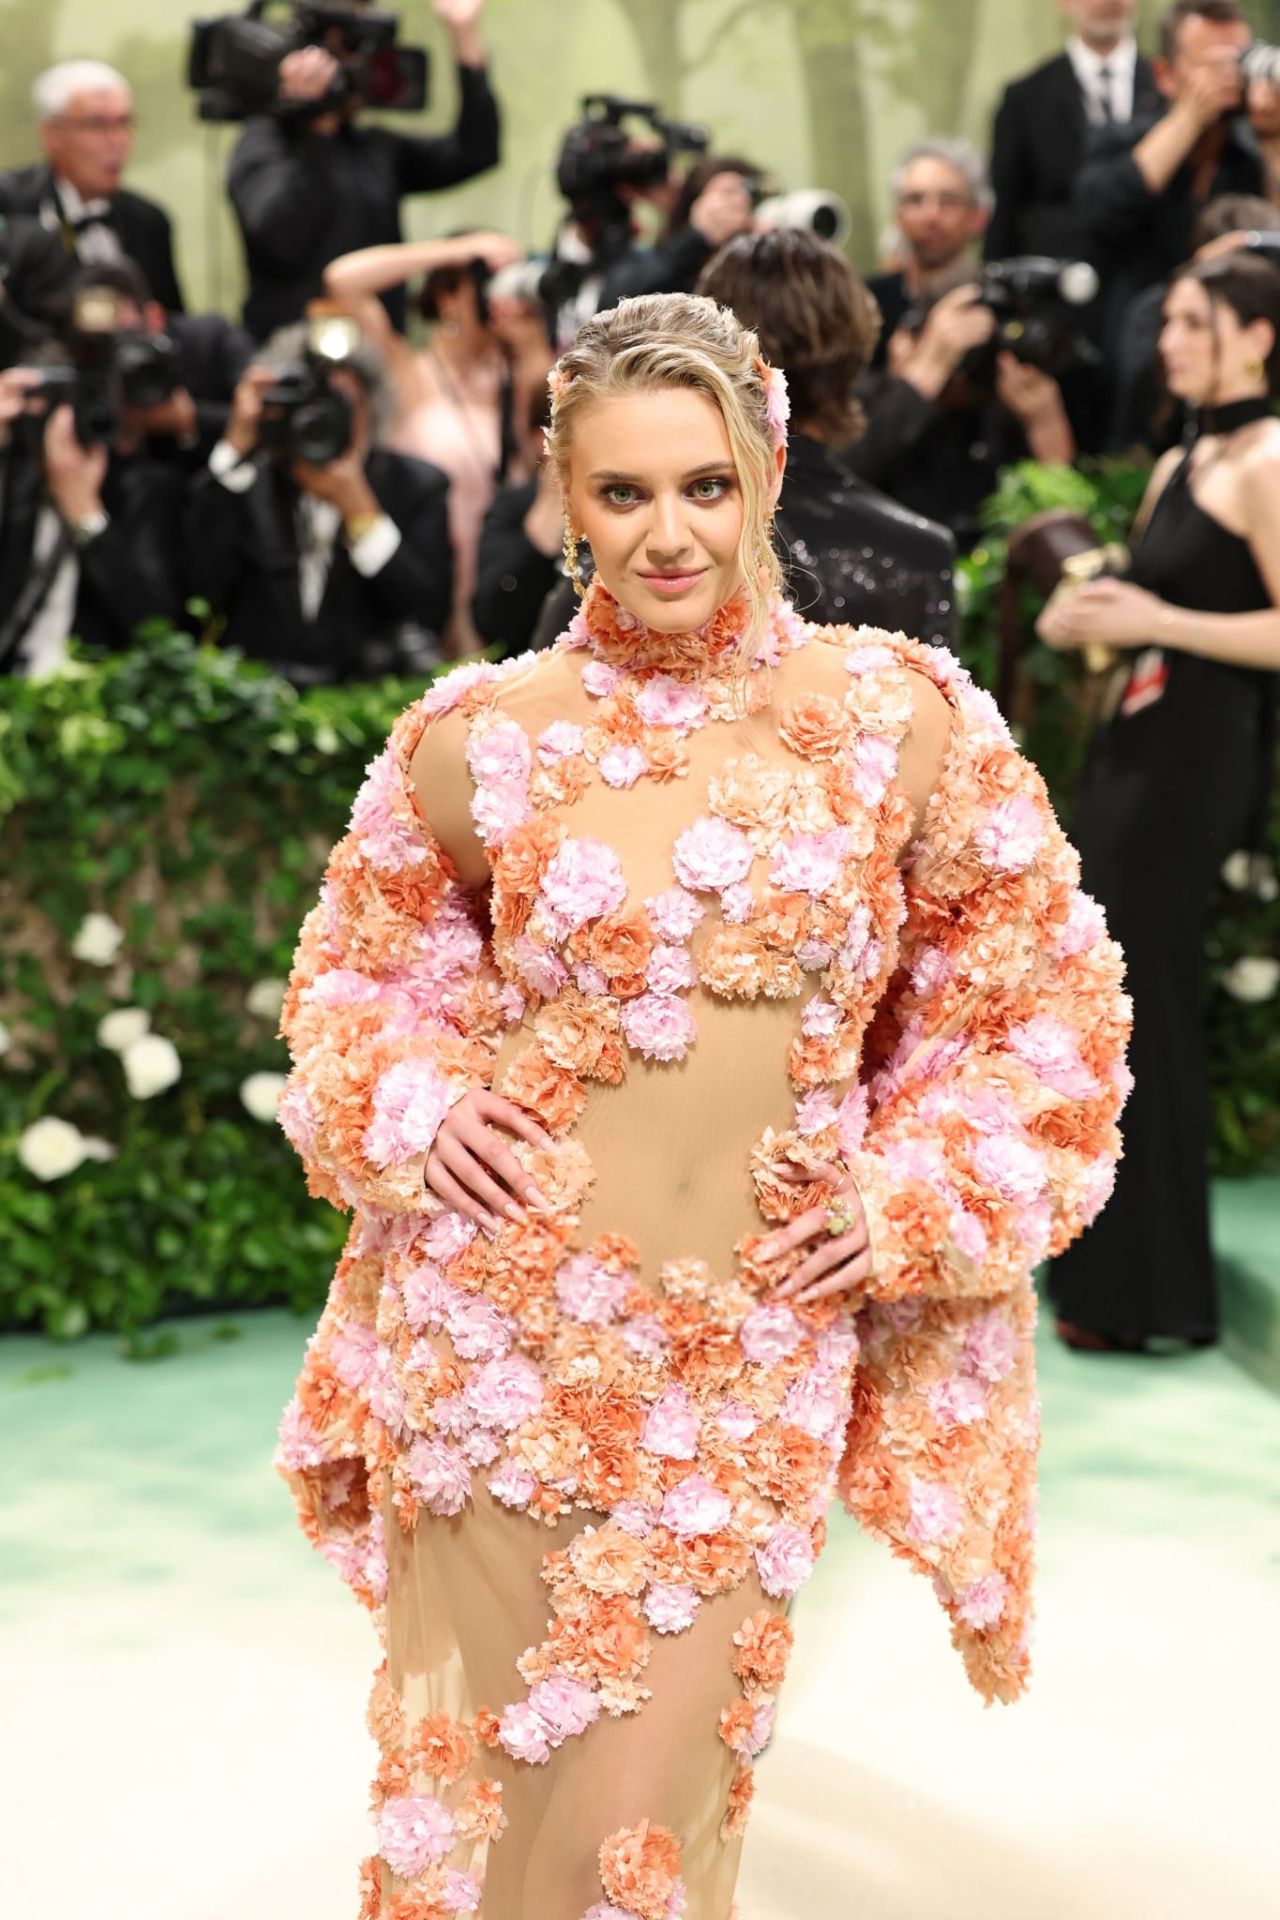 KELSEA BALLERINI AND CHASE STOKES MAKE A STUNNING DEBUT AT THE 2024 MET GALA IN NEW YORK07